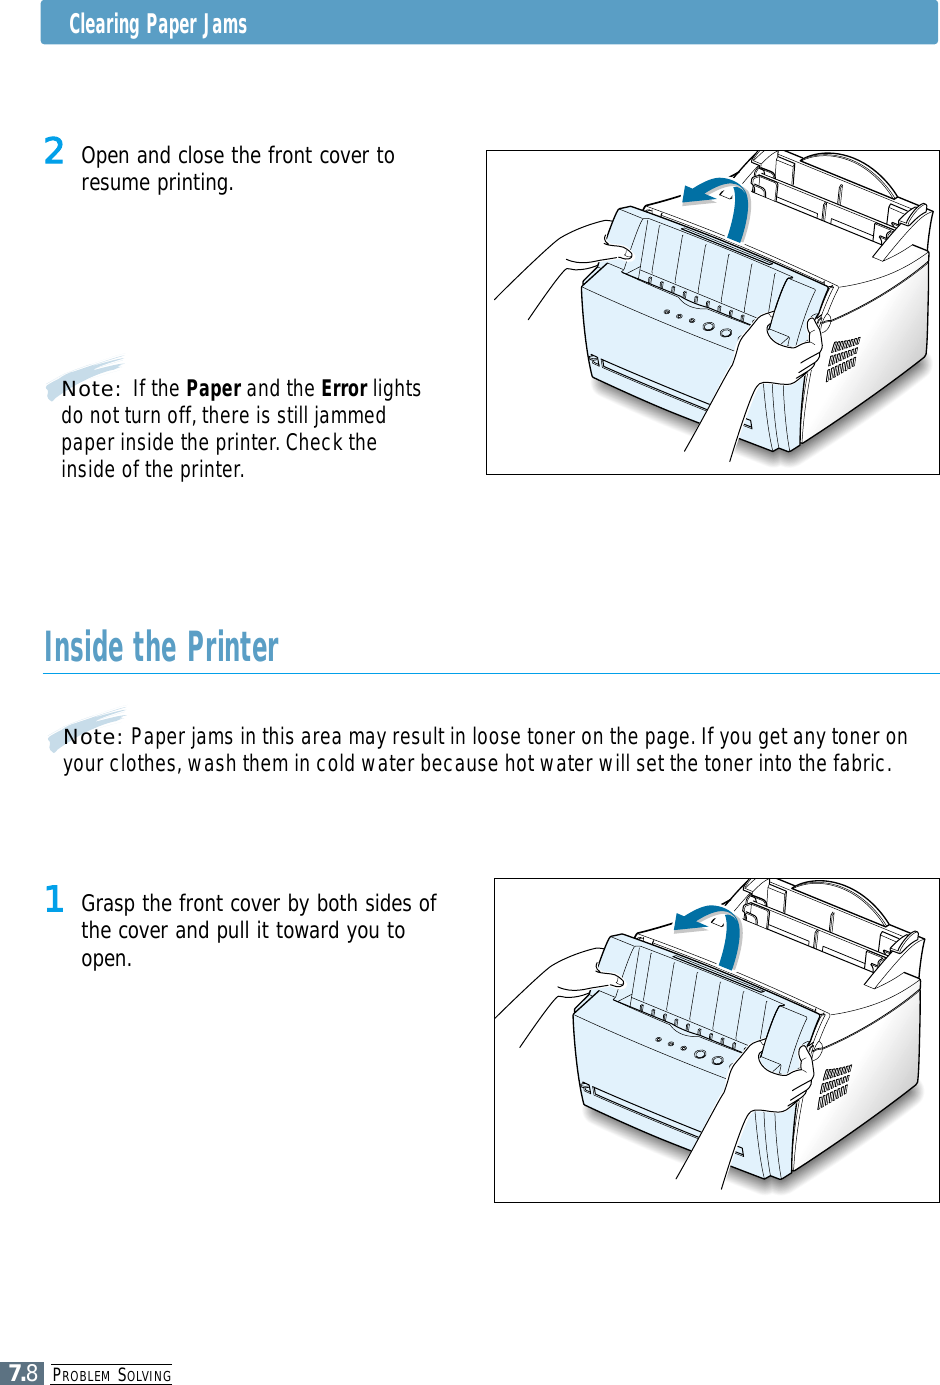 PROBLEM SOLVING7.8Clearing Paper Jams2 Open and close the front cover toresume printing.Note: If the Paper and the Error lightsdo not turn off, there is still jammedpaper inside the printer. Check theinside of the printer.Inside the Printer1 Grasp the front cover by both sides ofthe cover and pull it toward you toopen.Note: Paper jams in this area may result in loose toner on the page. If you get any toner onyour clothes, wash them in cold water because hot water will set the toner into the fabric.